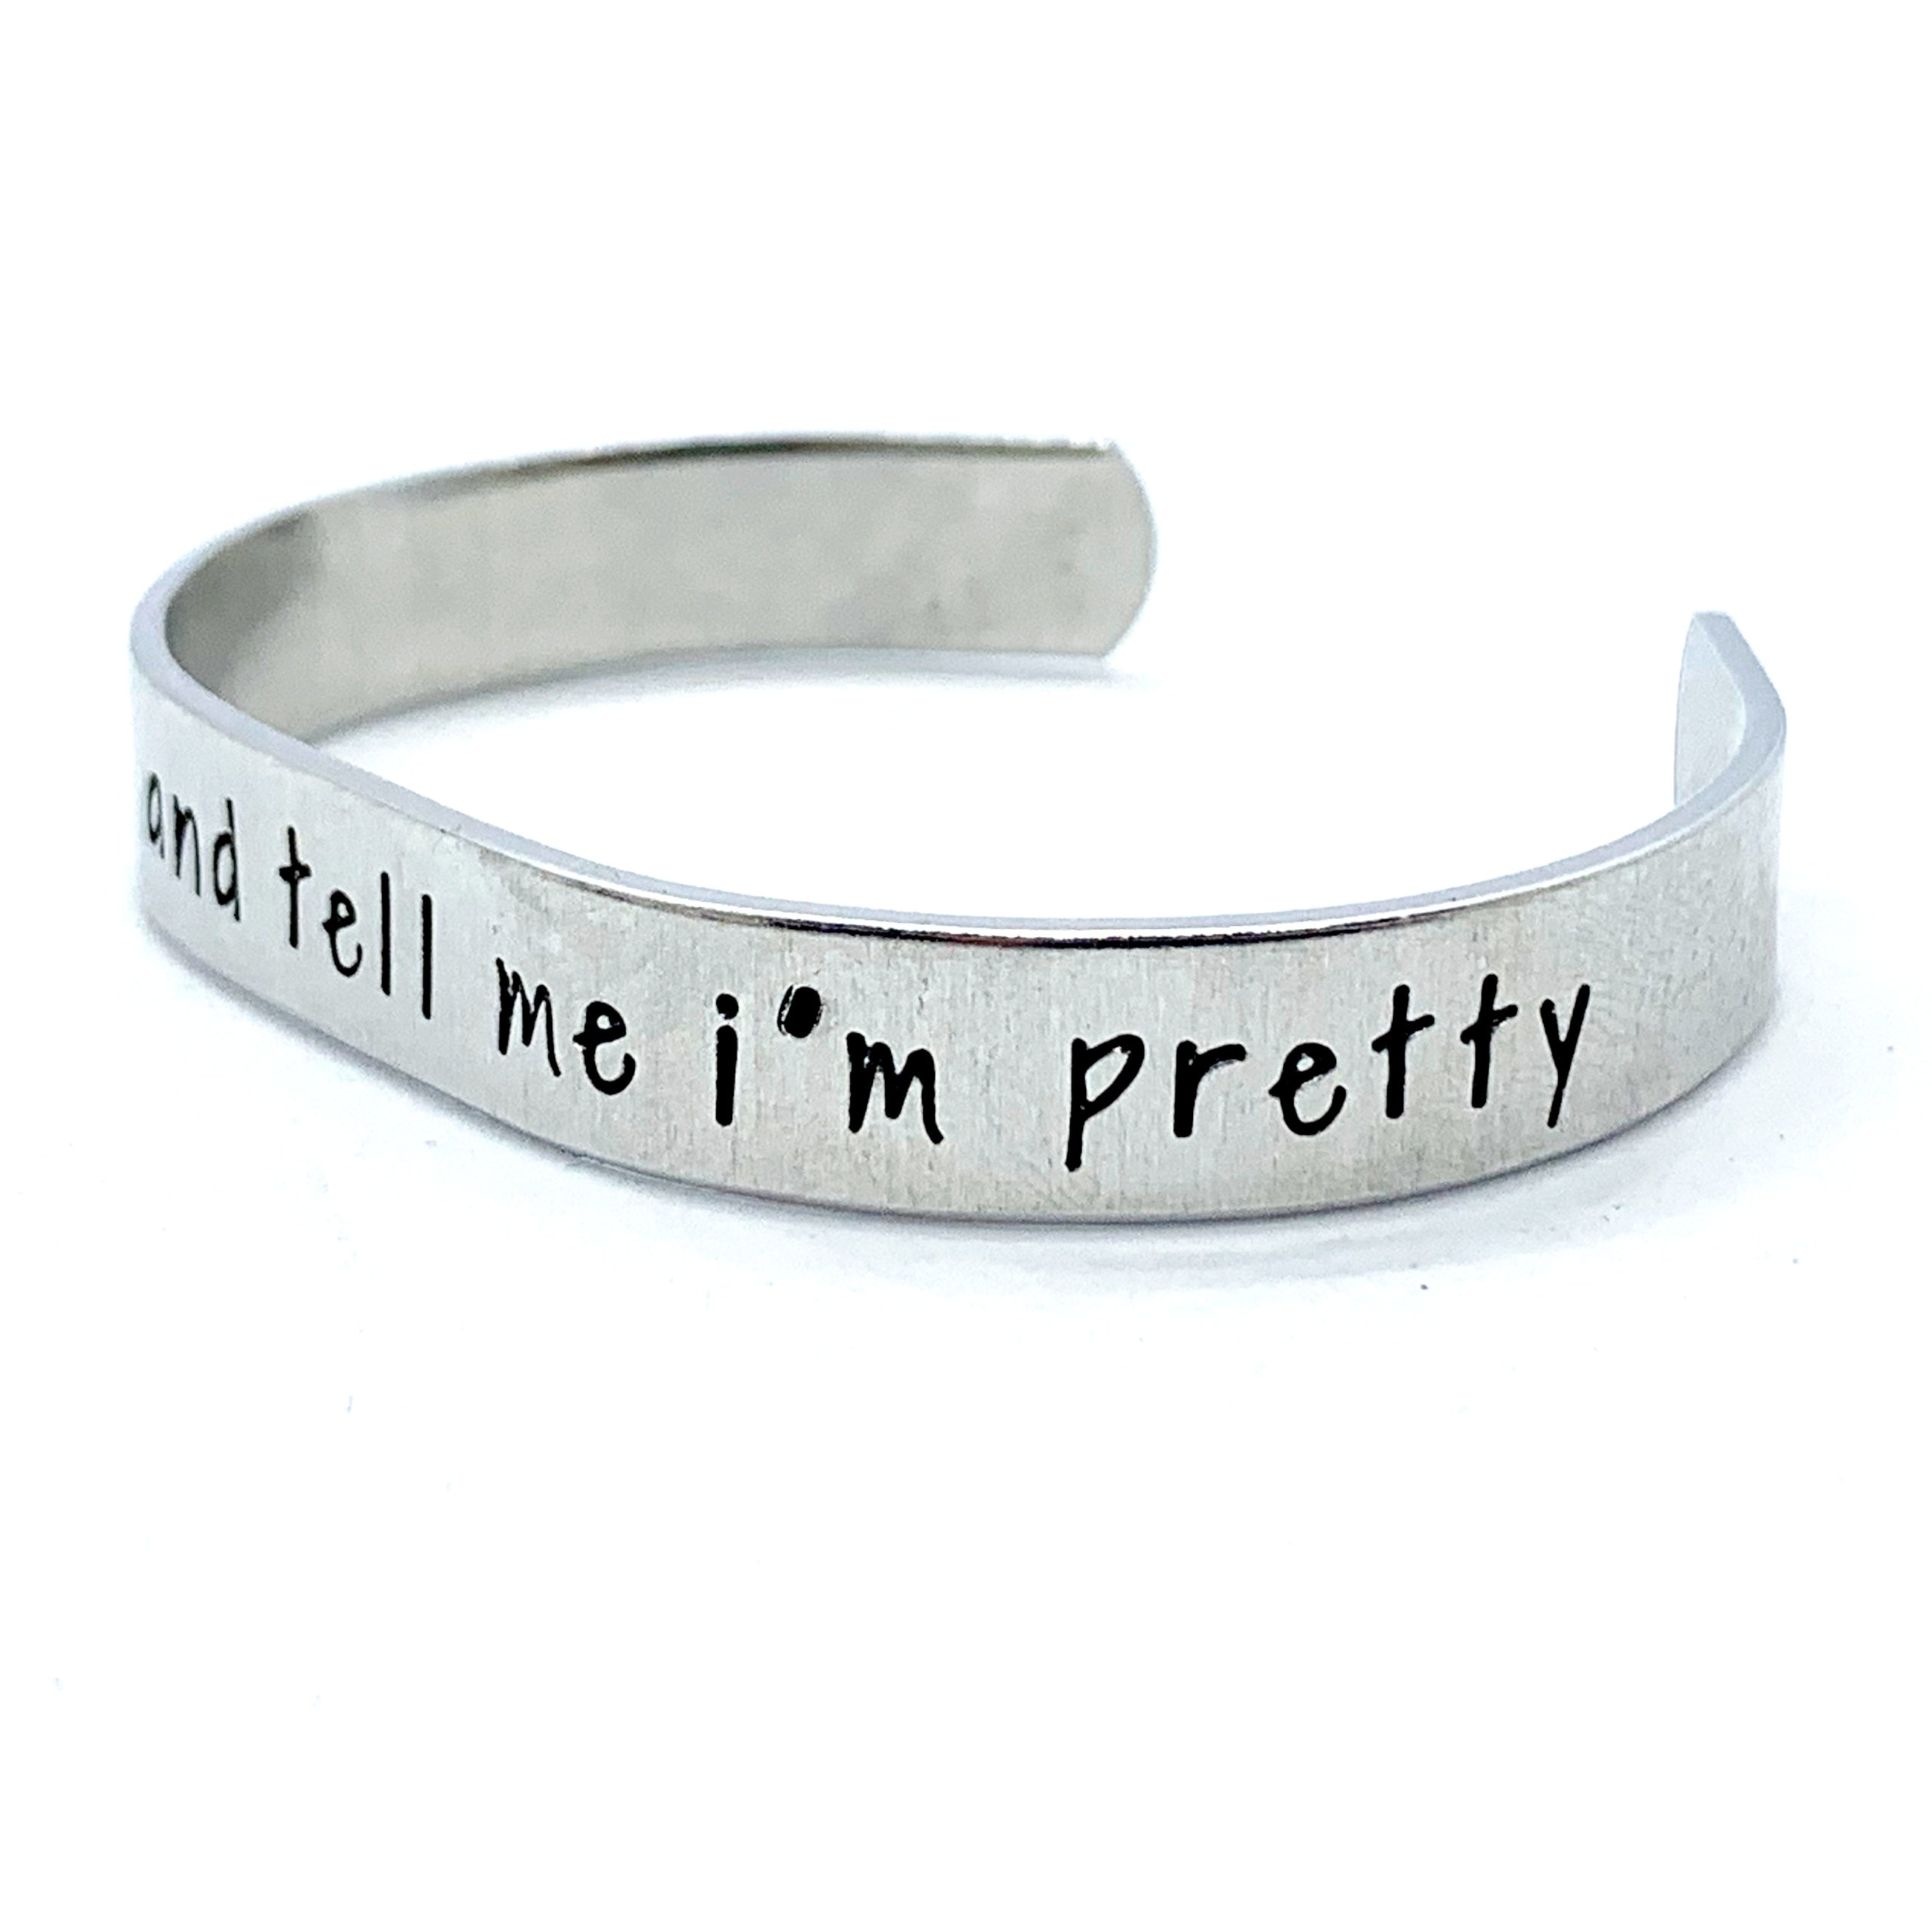 ⅜ inch Aluminum Cuff - Feed Me Tacos And Tell Me I'm Pretty